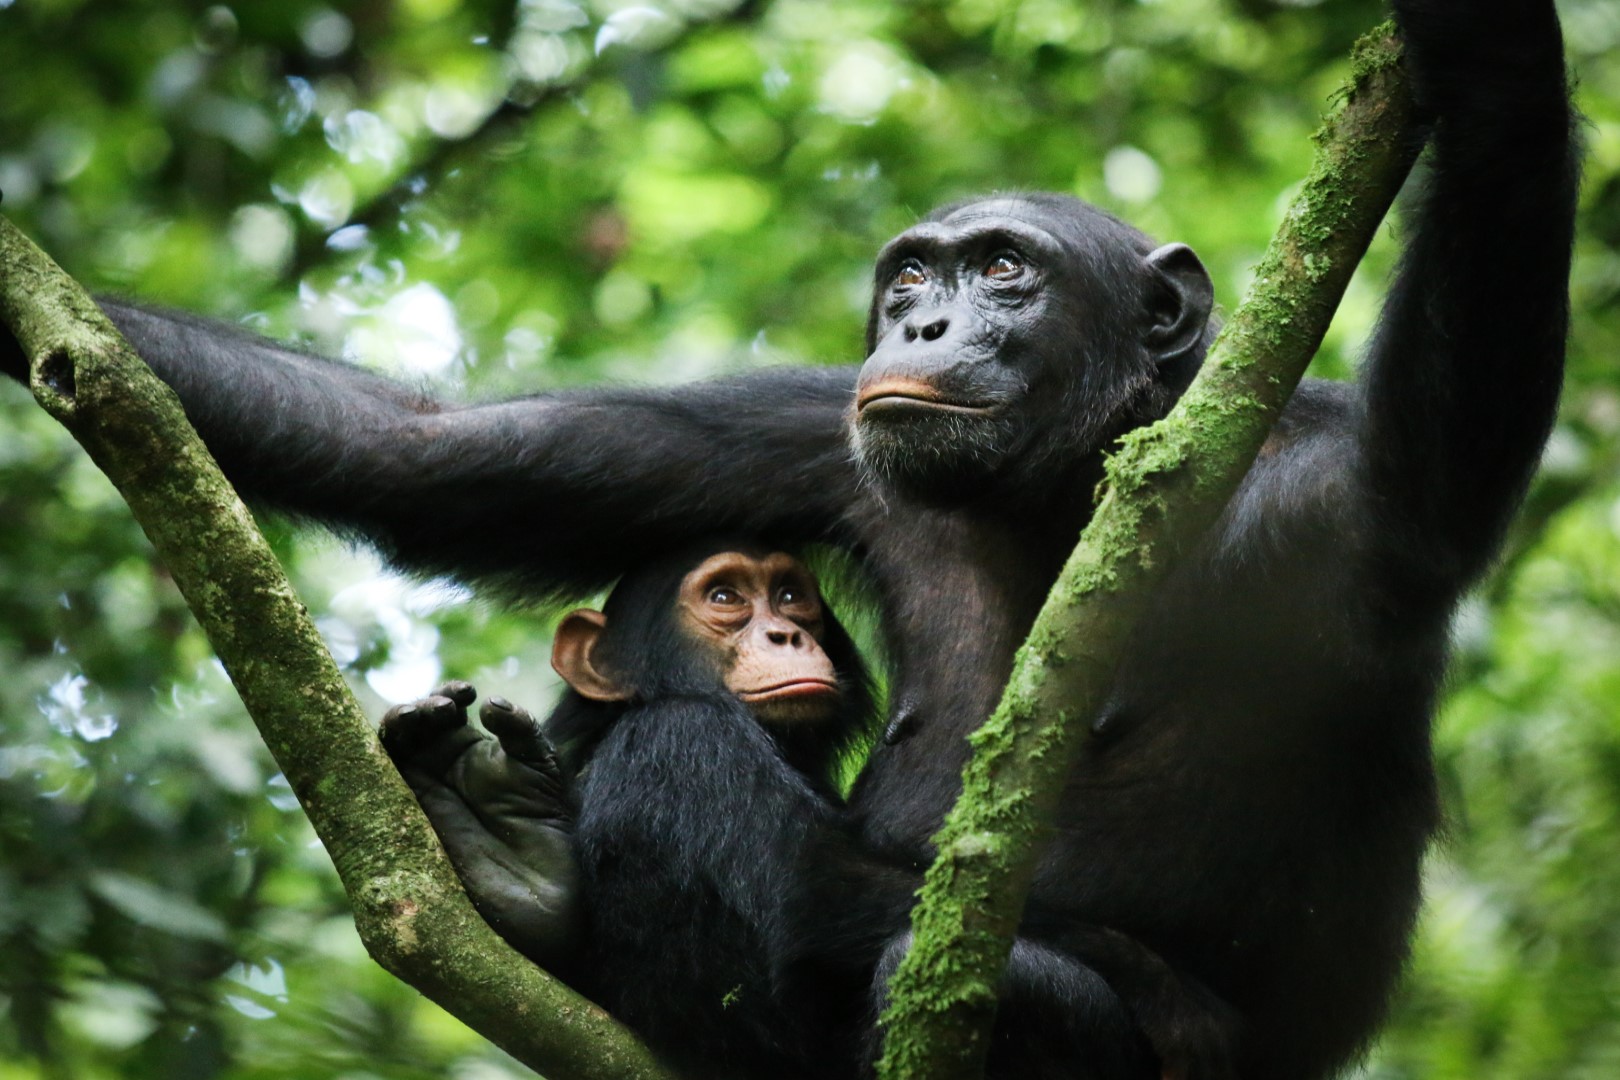 Mum and baby chimpanzee in Kibale National Park